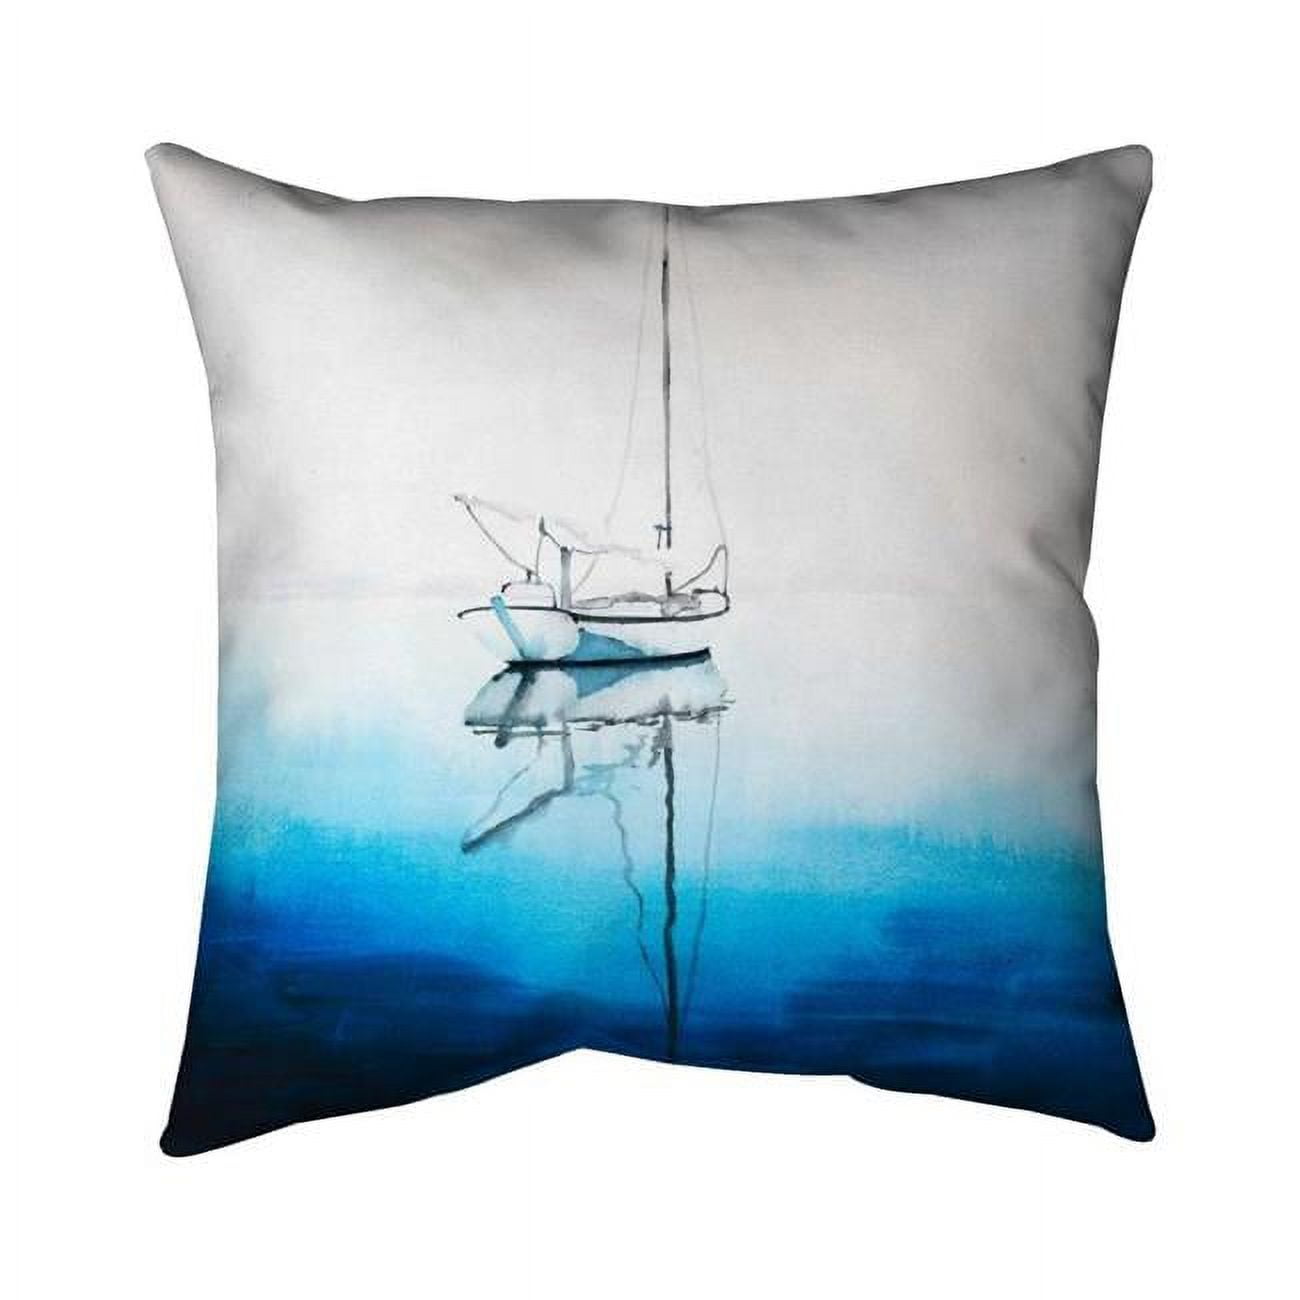 Begin Home Decor 5542-1616-CO99 16 x 16 in. White Boat on A Deep Blue Water-Double Sided Print Outdoor Pillow Cover